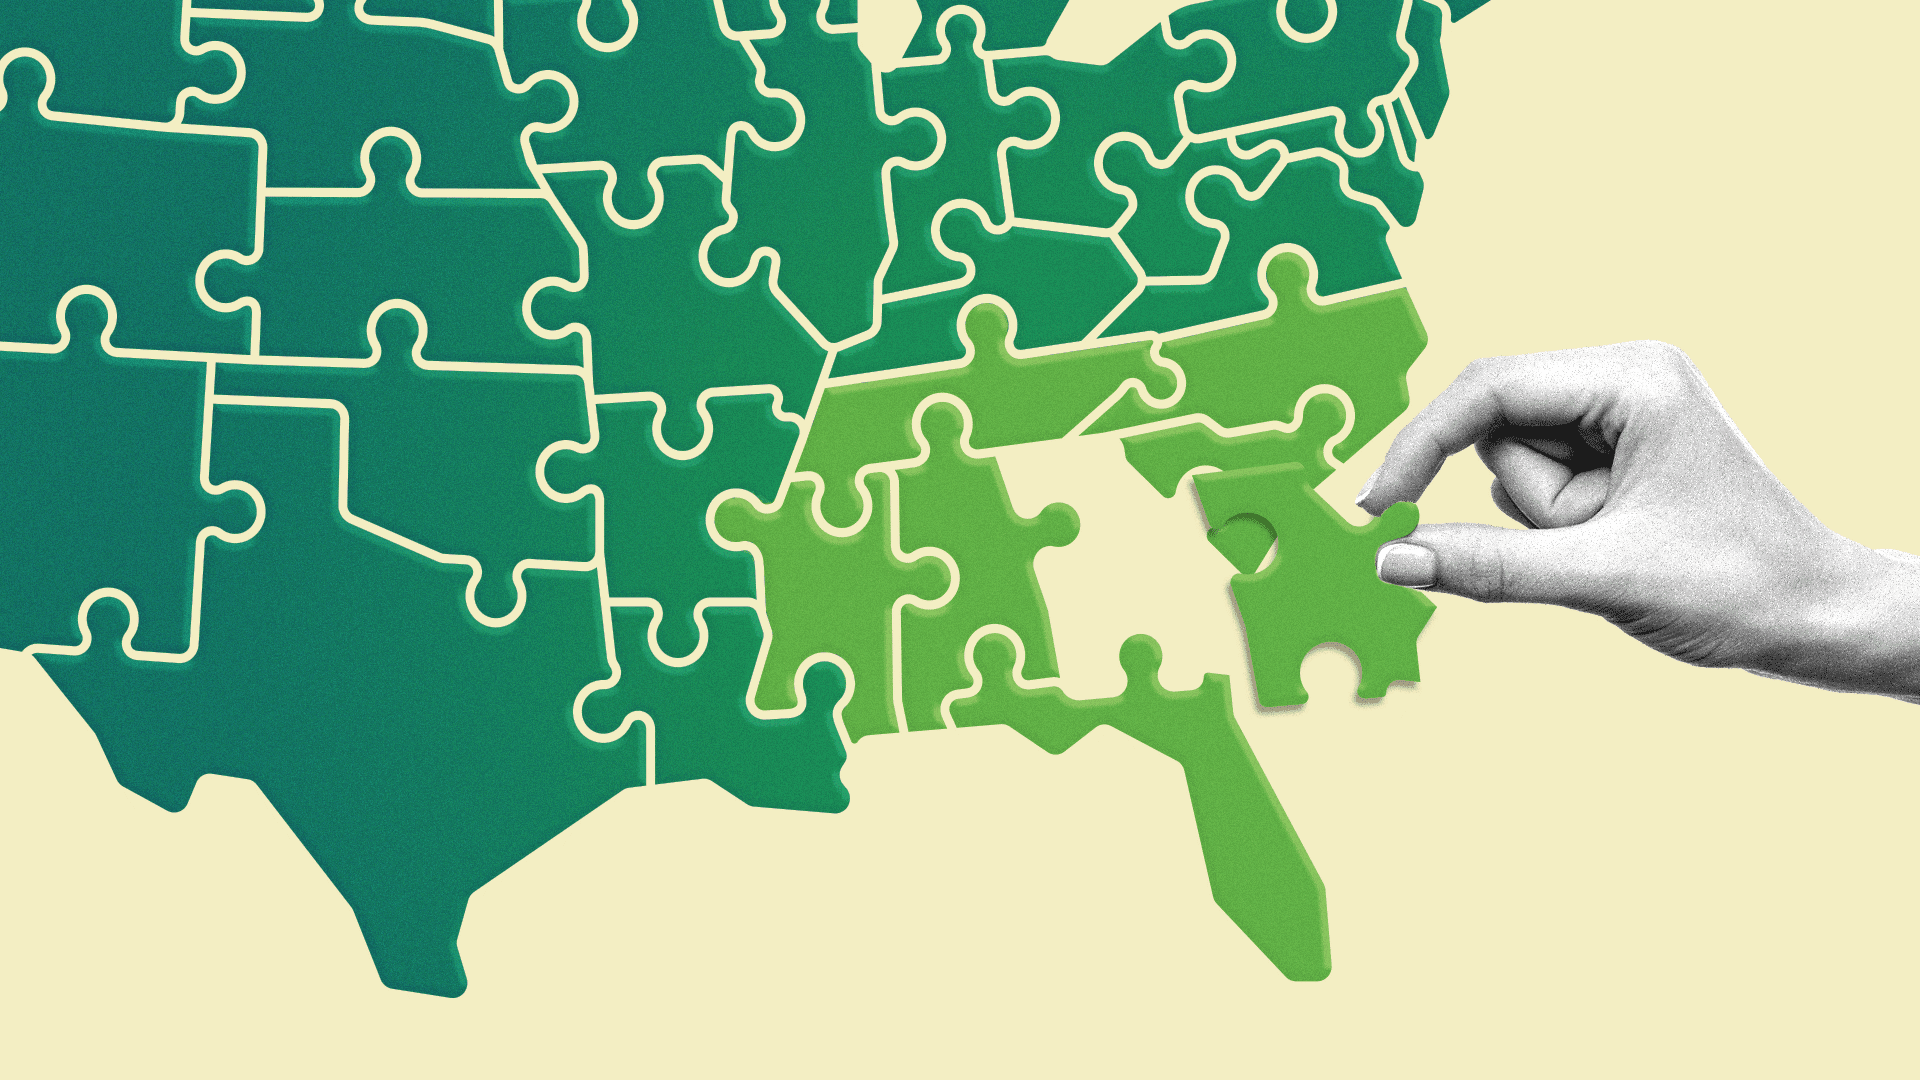 Illustration of the Southeastern United States as a puzzle, with Georgia being fitted into place.